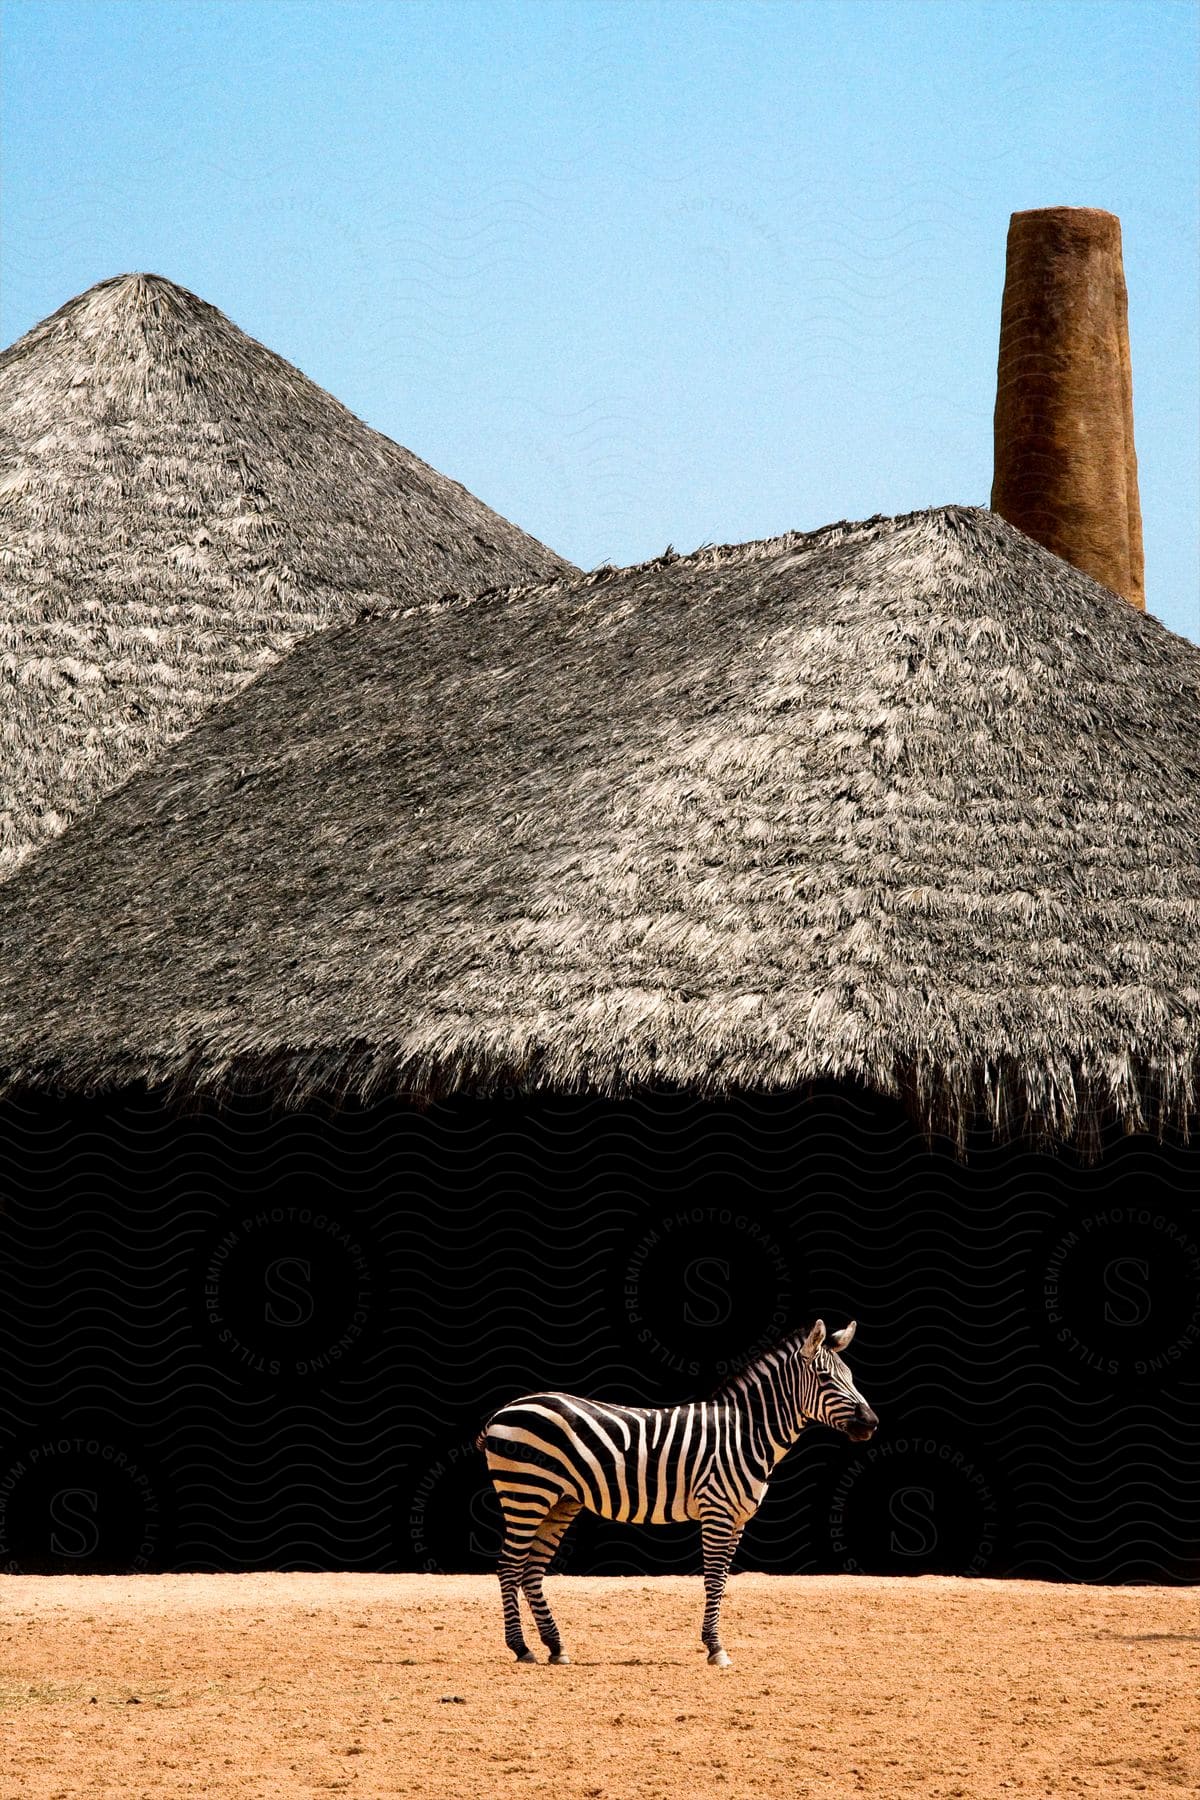 Zebra in front of a thatched roof house in a flat landscape